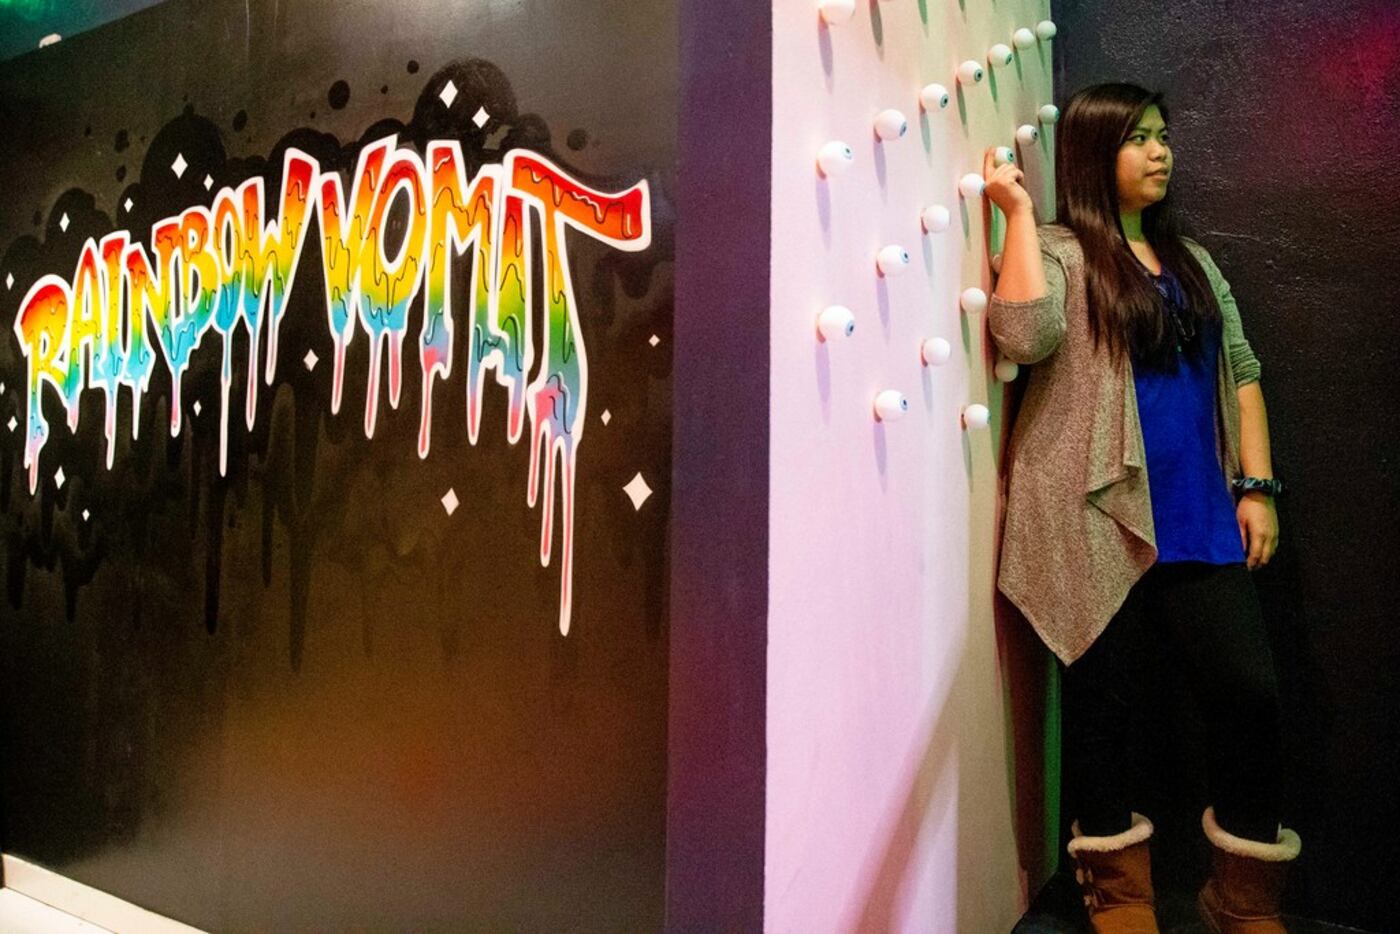 Renee Ng plays with an eyeball on a wall during a soft opening night at Rainbow Vomit on...